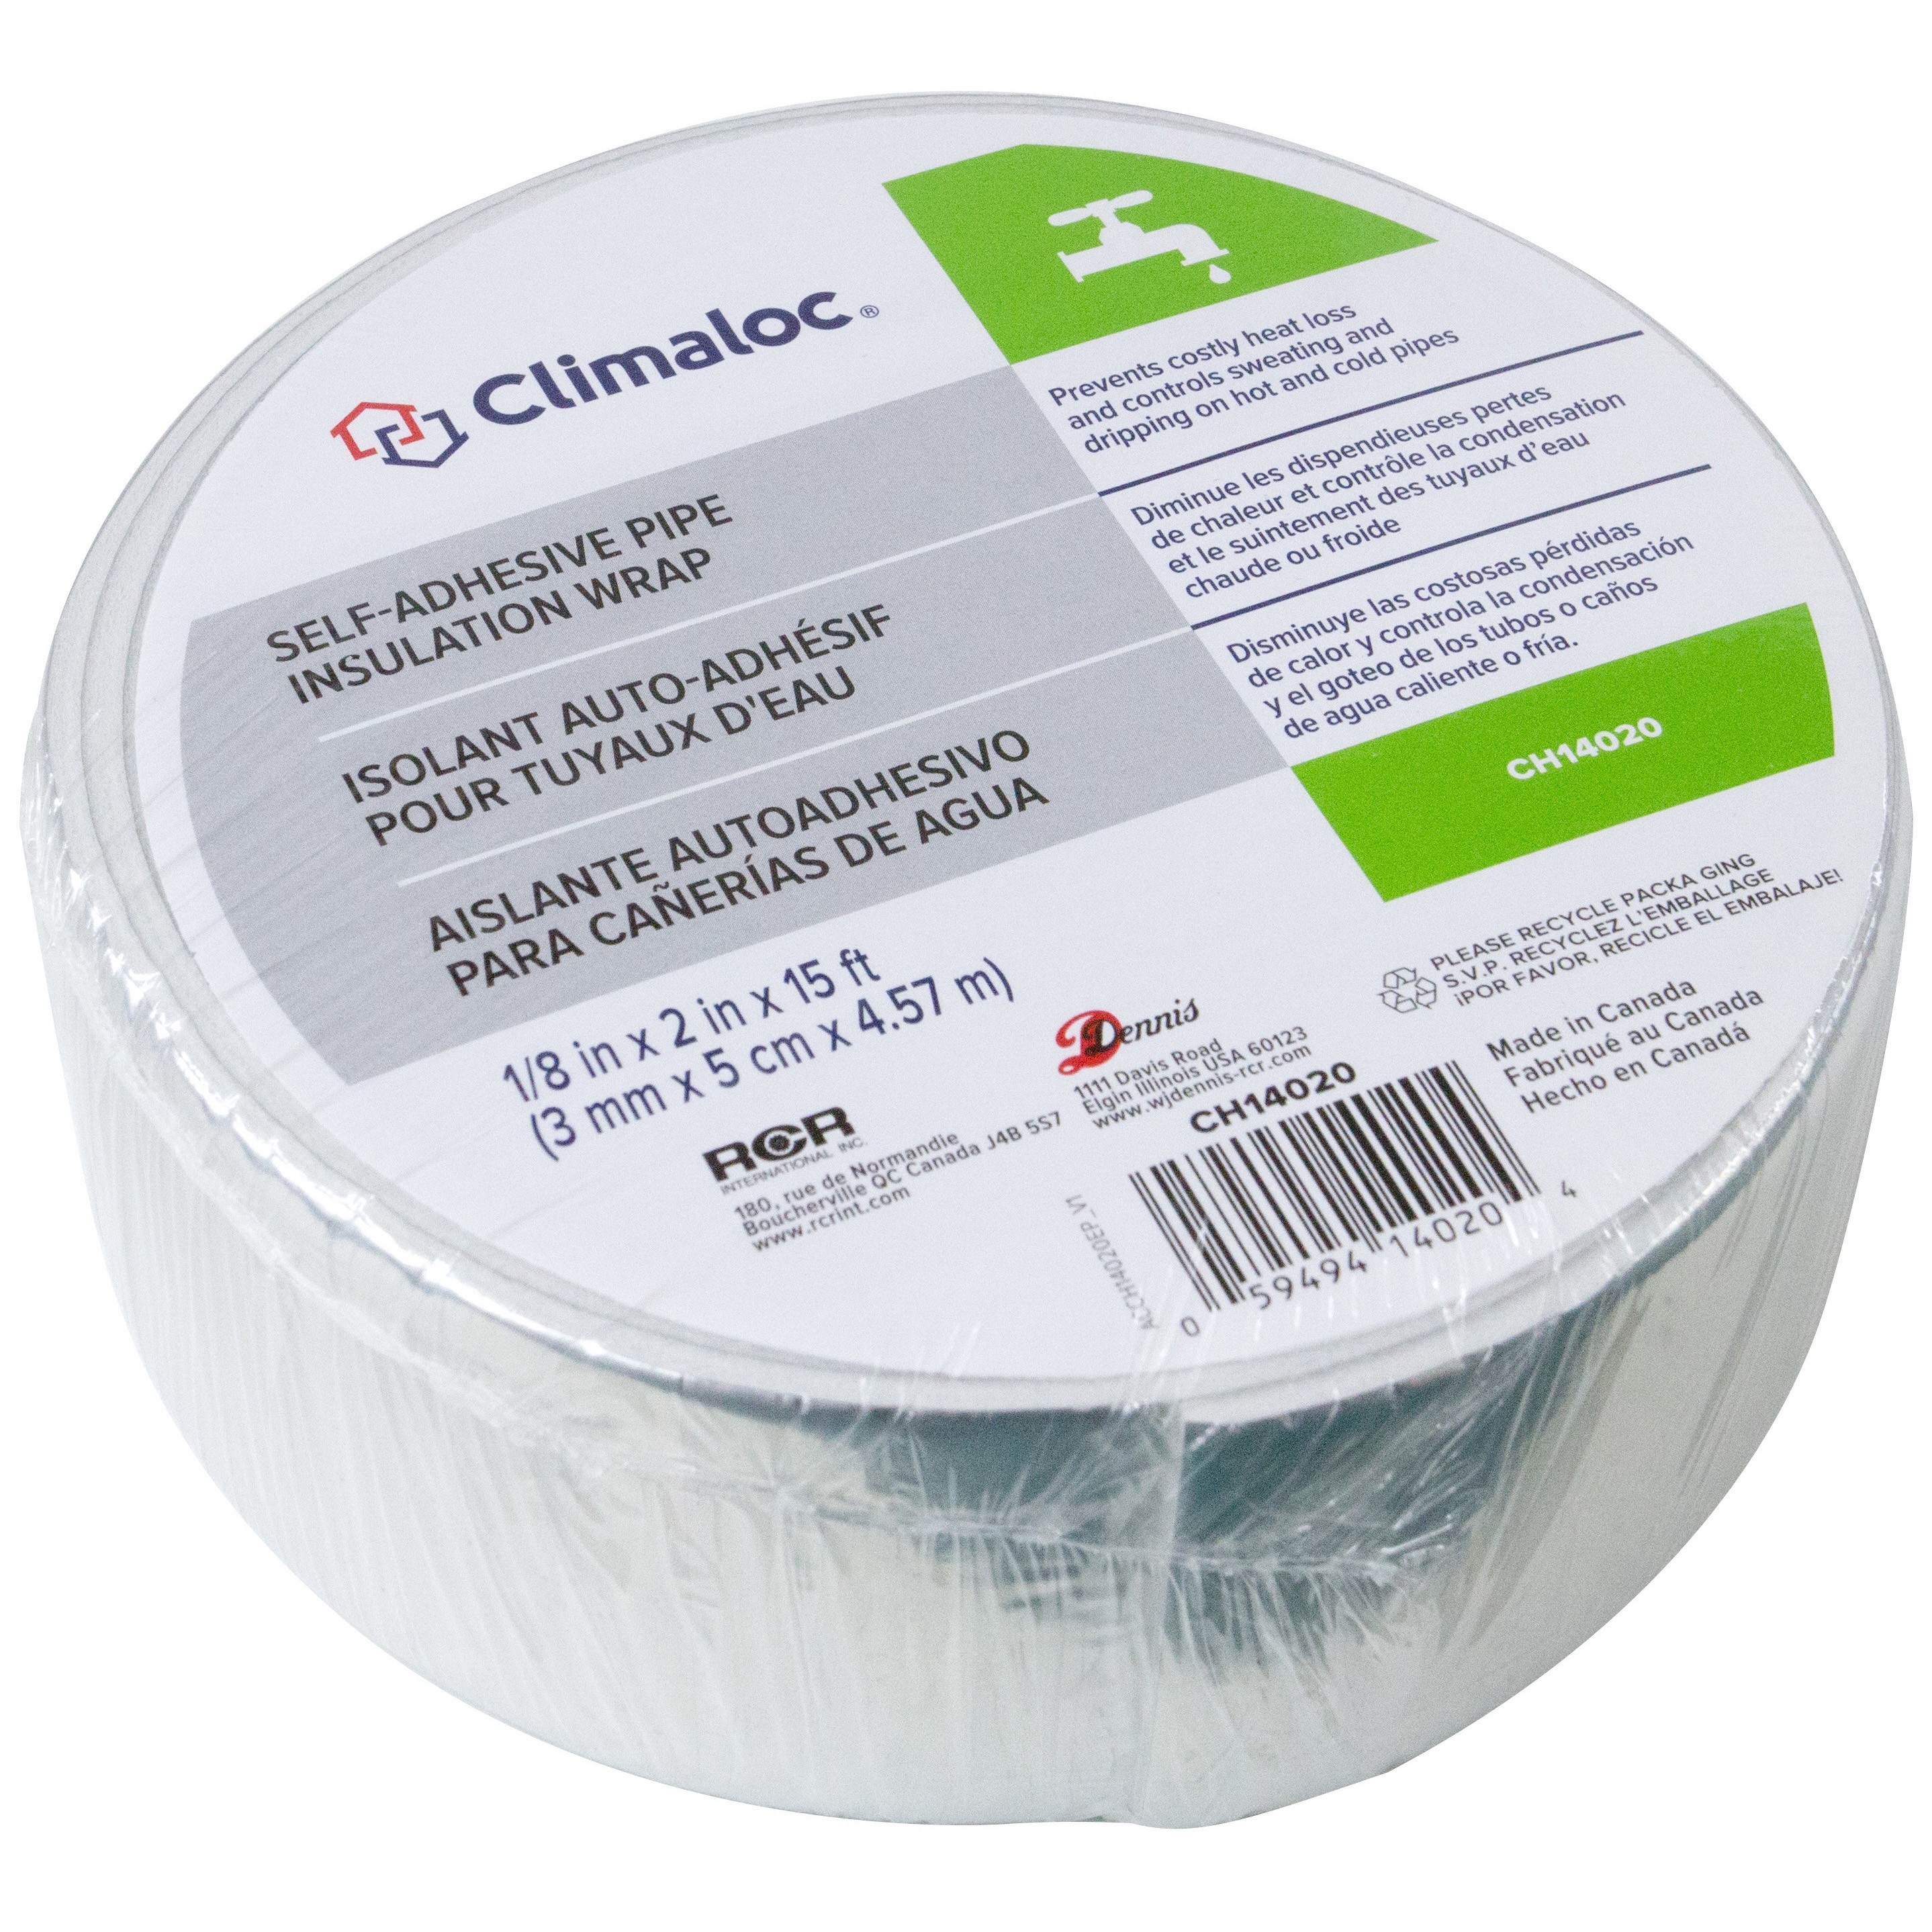 Climaloc CH14020 Pipe Insulation Wrap, 15 ft L, 2 in W, 1/8 in Thick, Polypropylene, Silver - 2